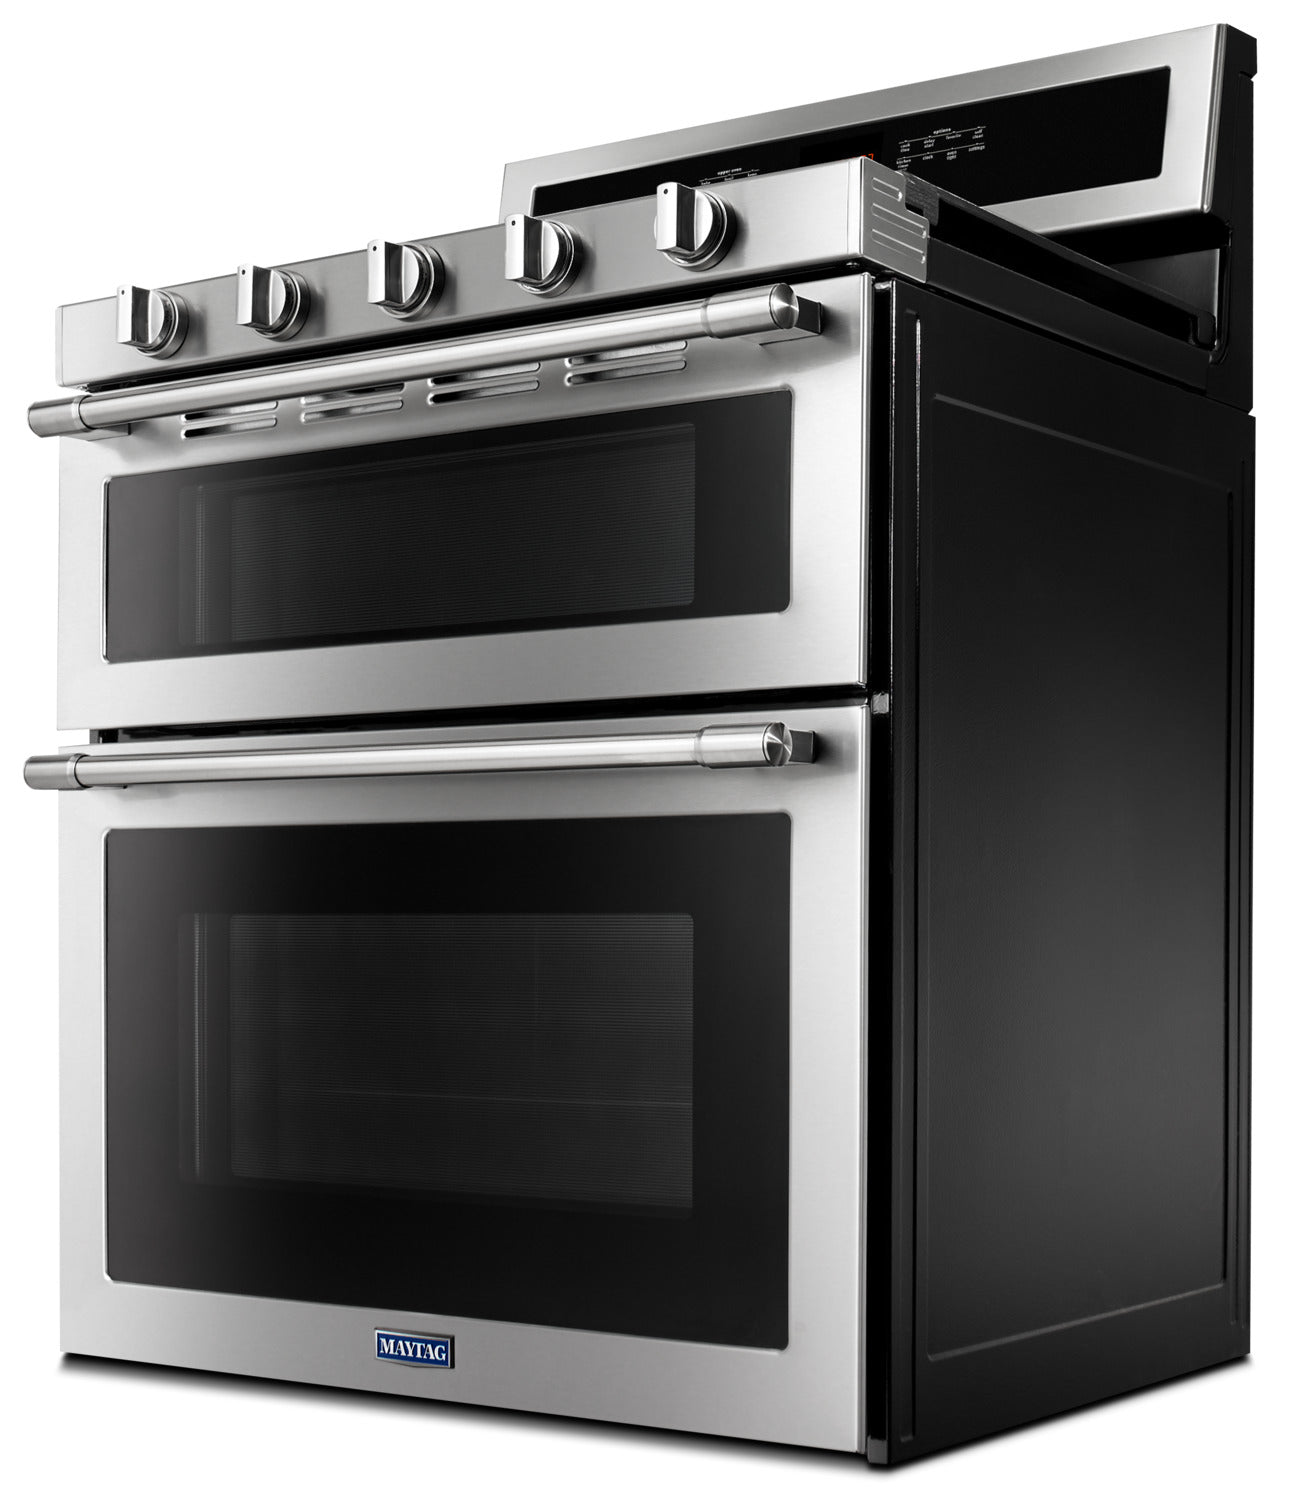 Maytag Stainless Steel Freestanding Gas Double Oven 60 Cu Ft